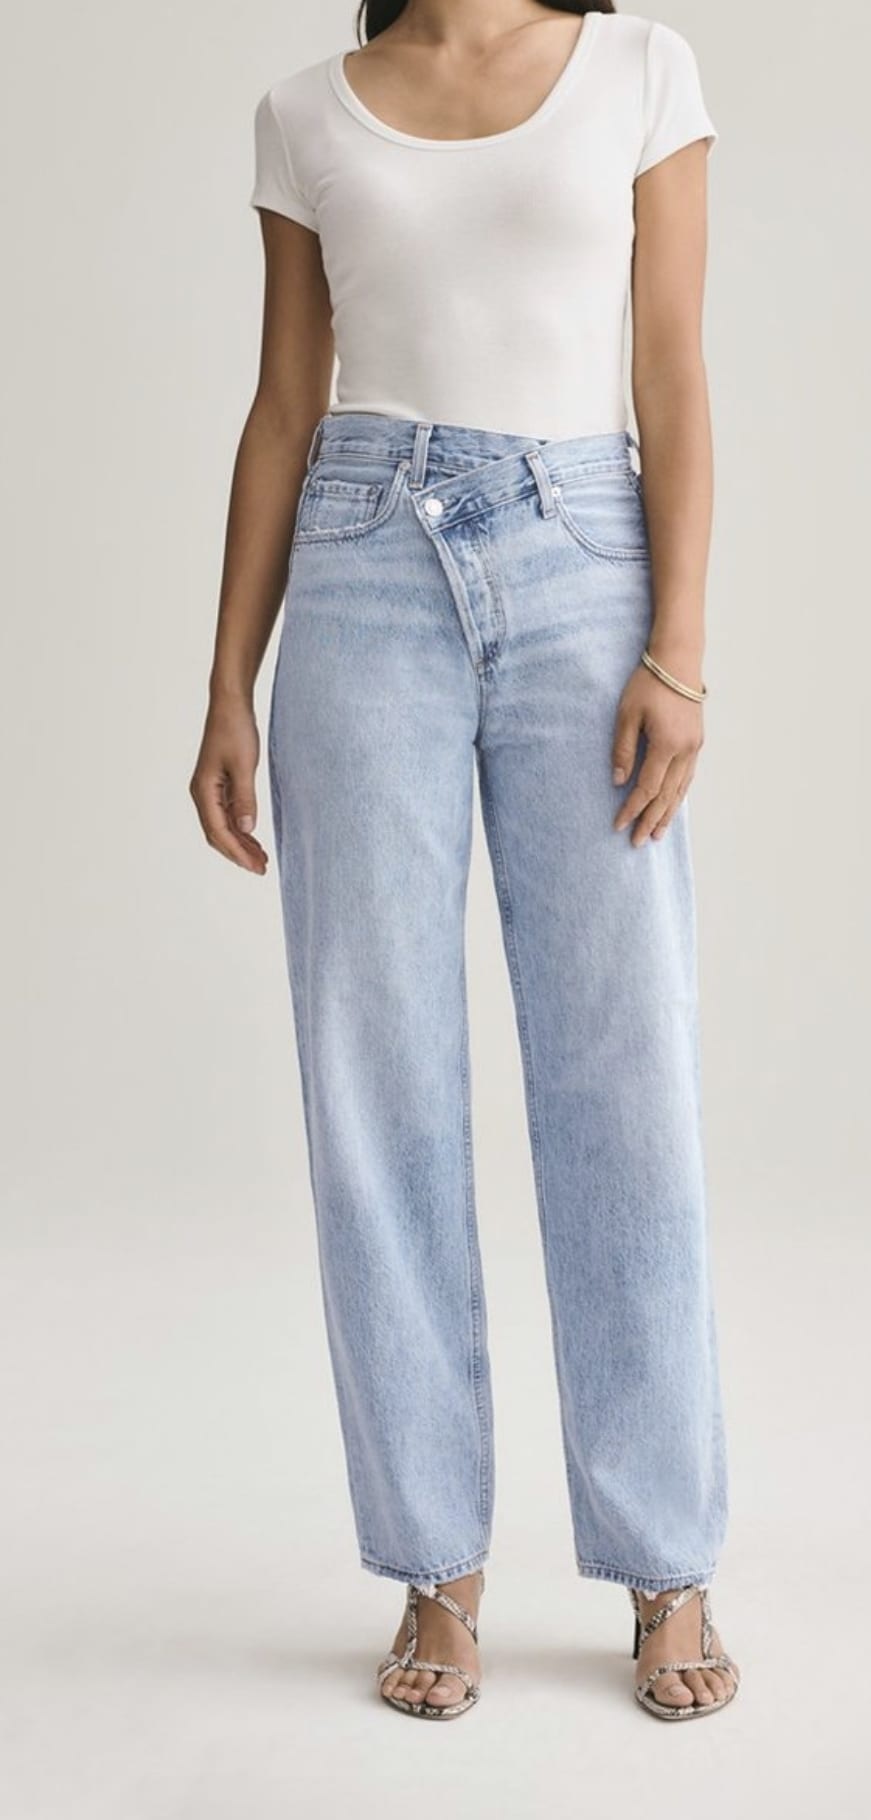 7 for all mankind a pocket flare jeans